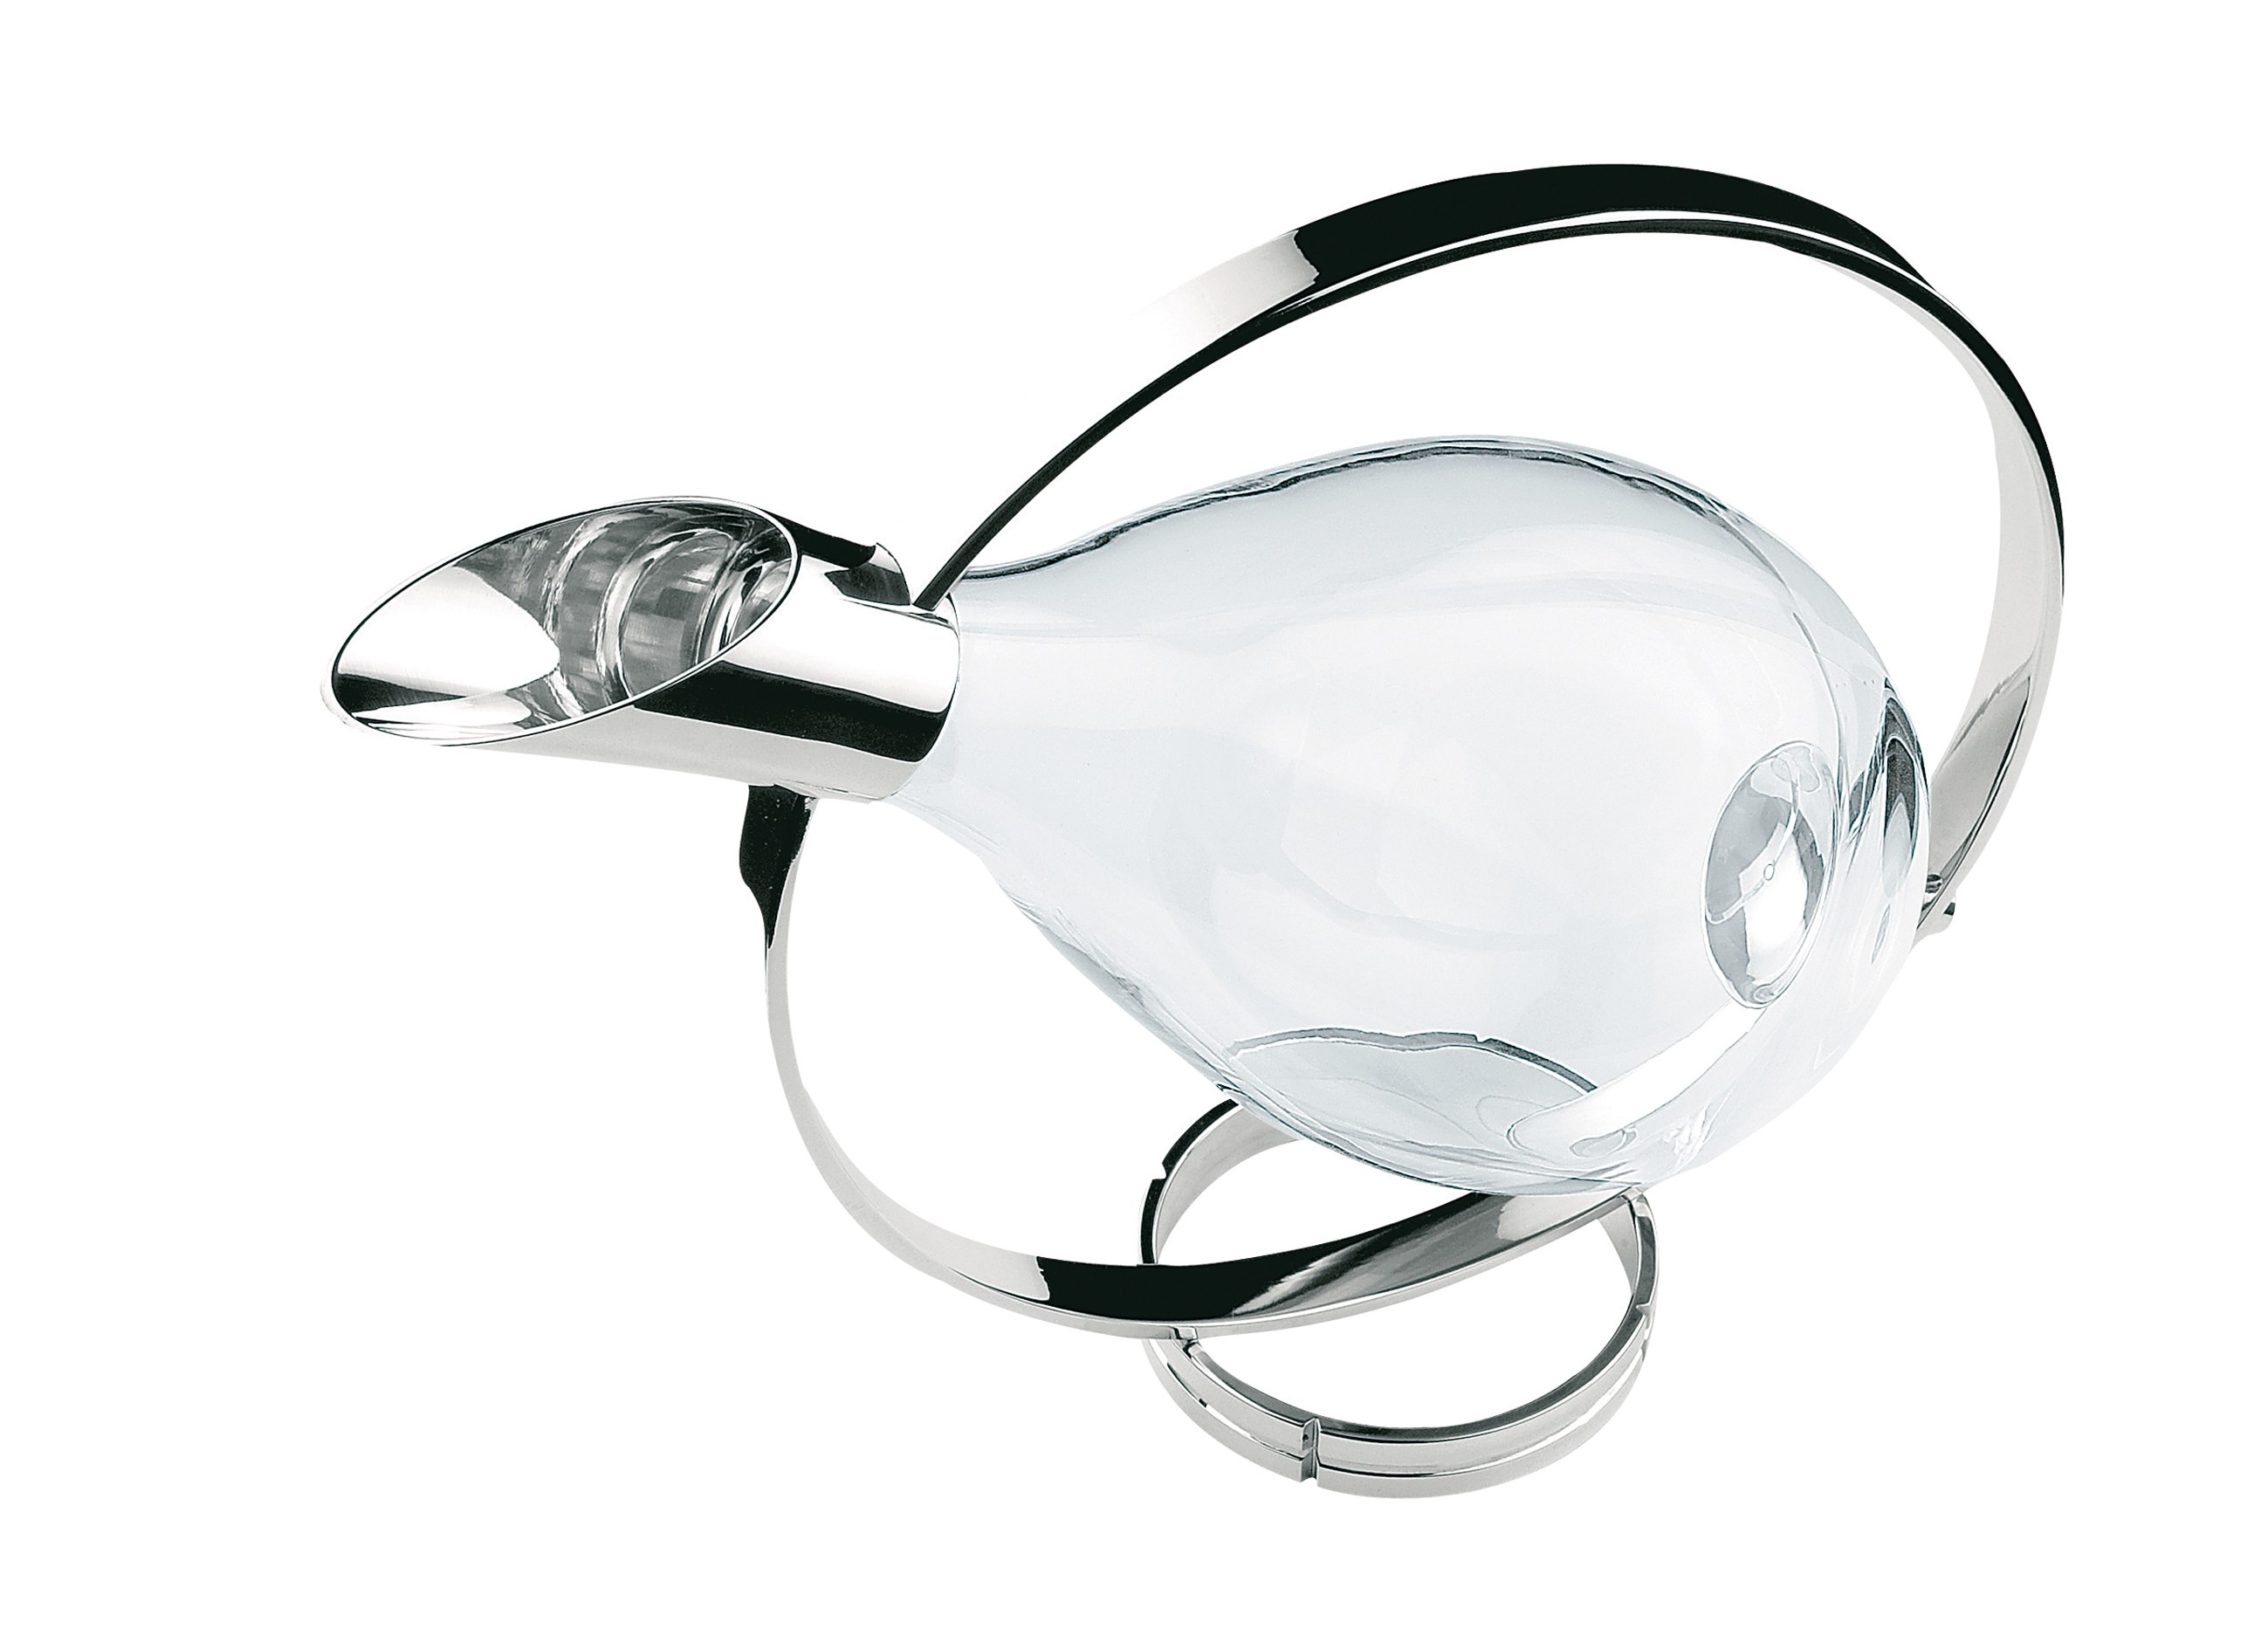 Christofle’s Fidelio silver-plated and glass wine decanter